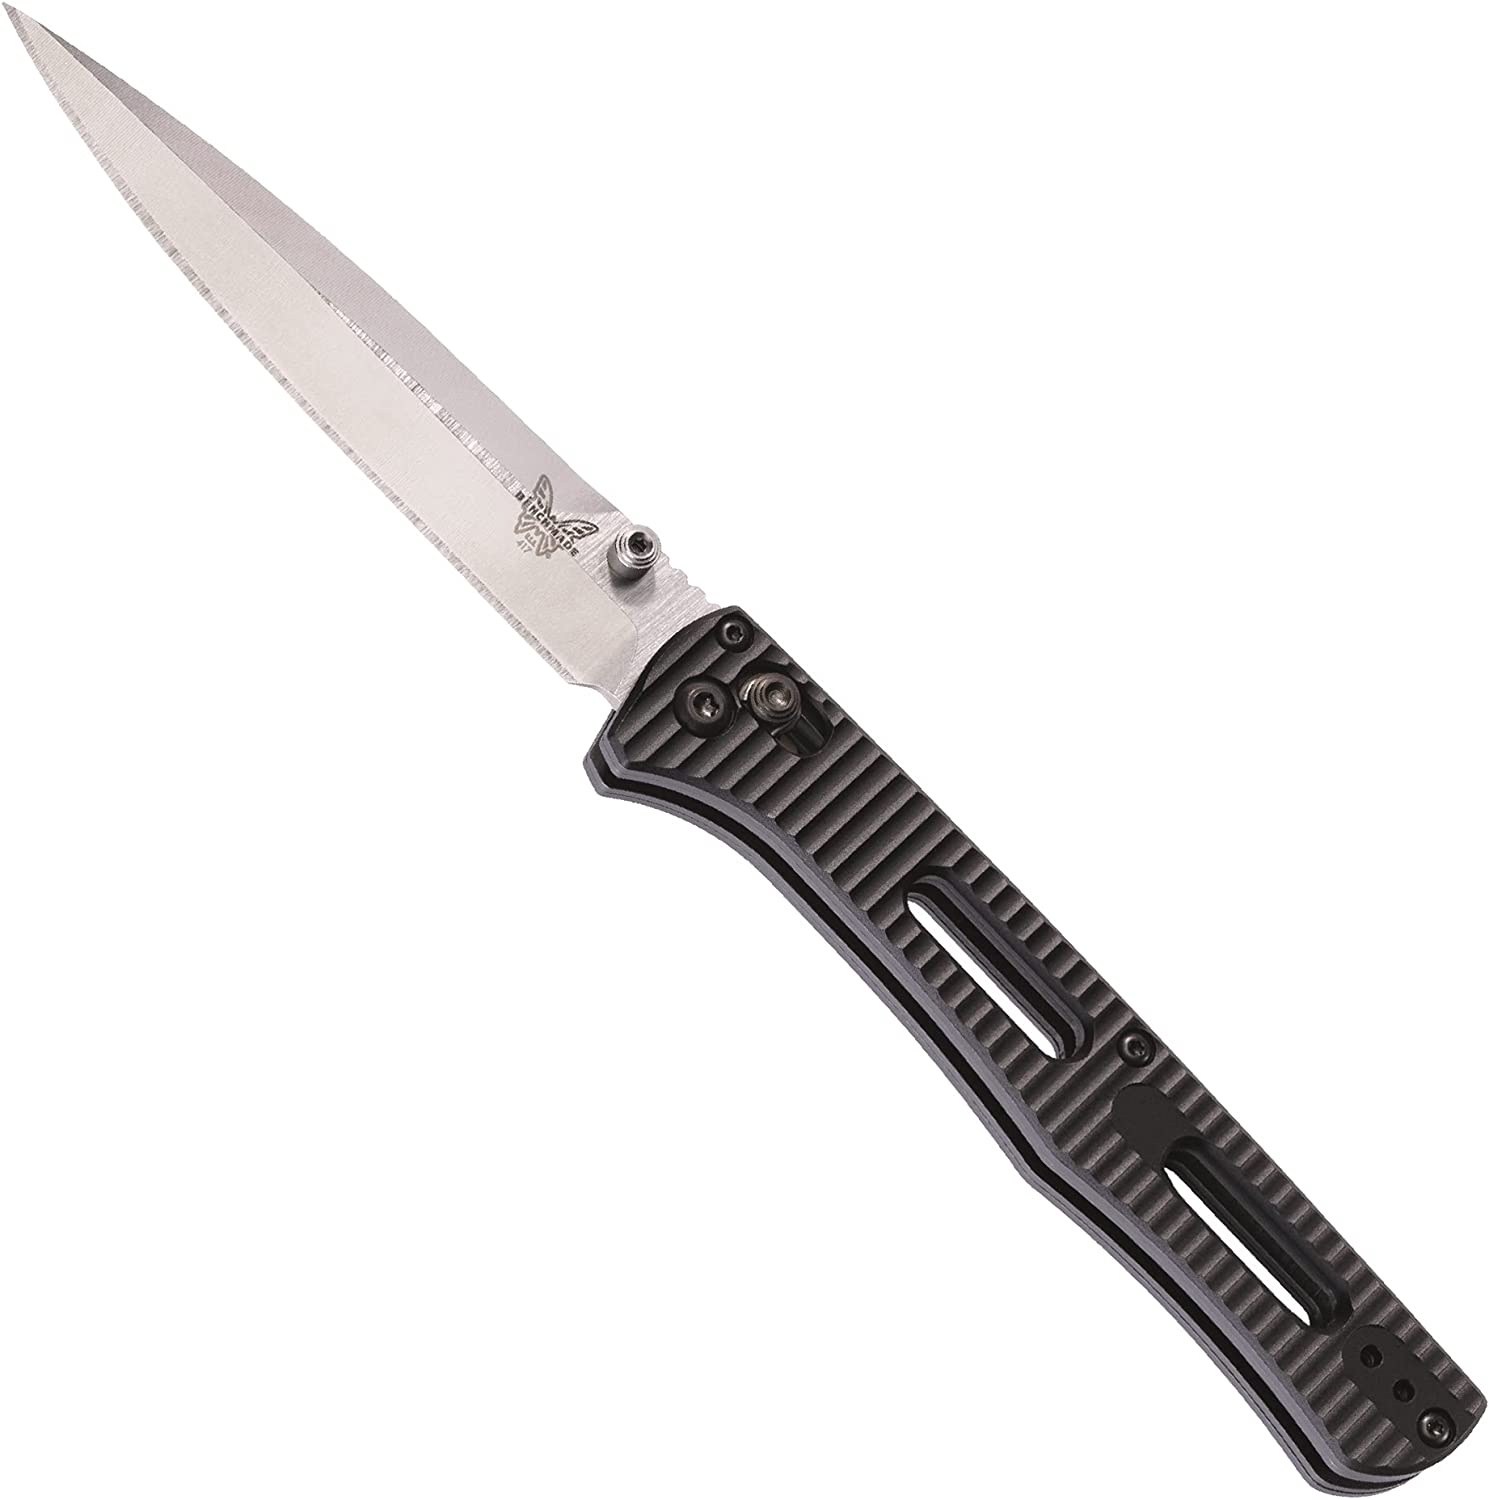 Benchmade – Fact 417 Minimalist Manual Open Folding,Spear-Point Blade, Made in USA Knife